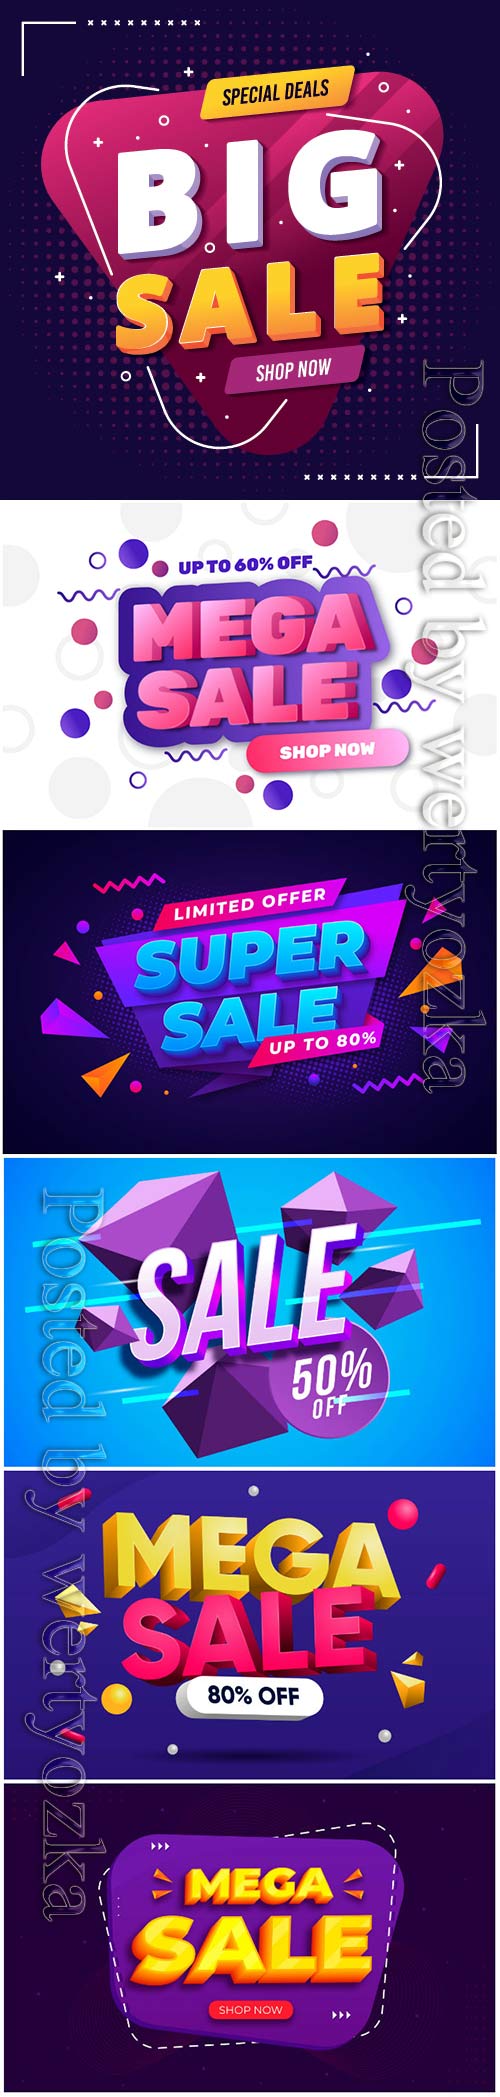 Colorful 3d sales vector background # 3